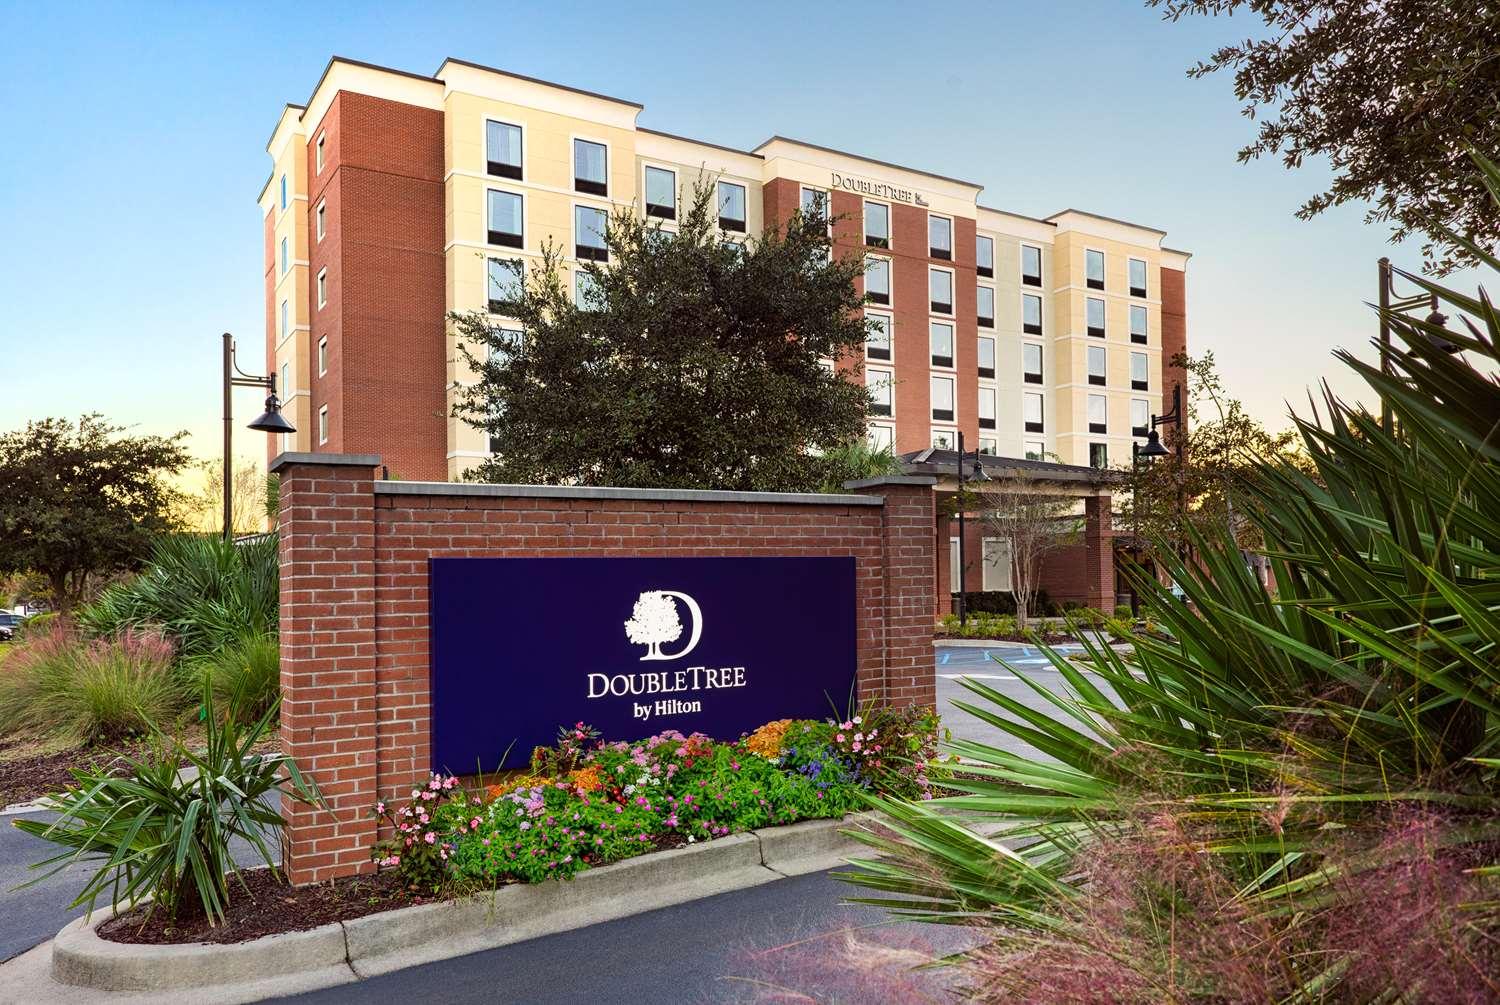 DoubleTree by Hilton Charleston Mount Pleasant in Mt. Pleasant, SC